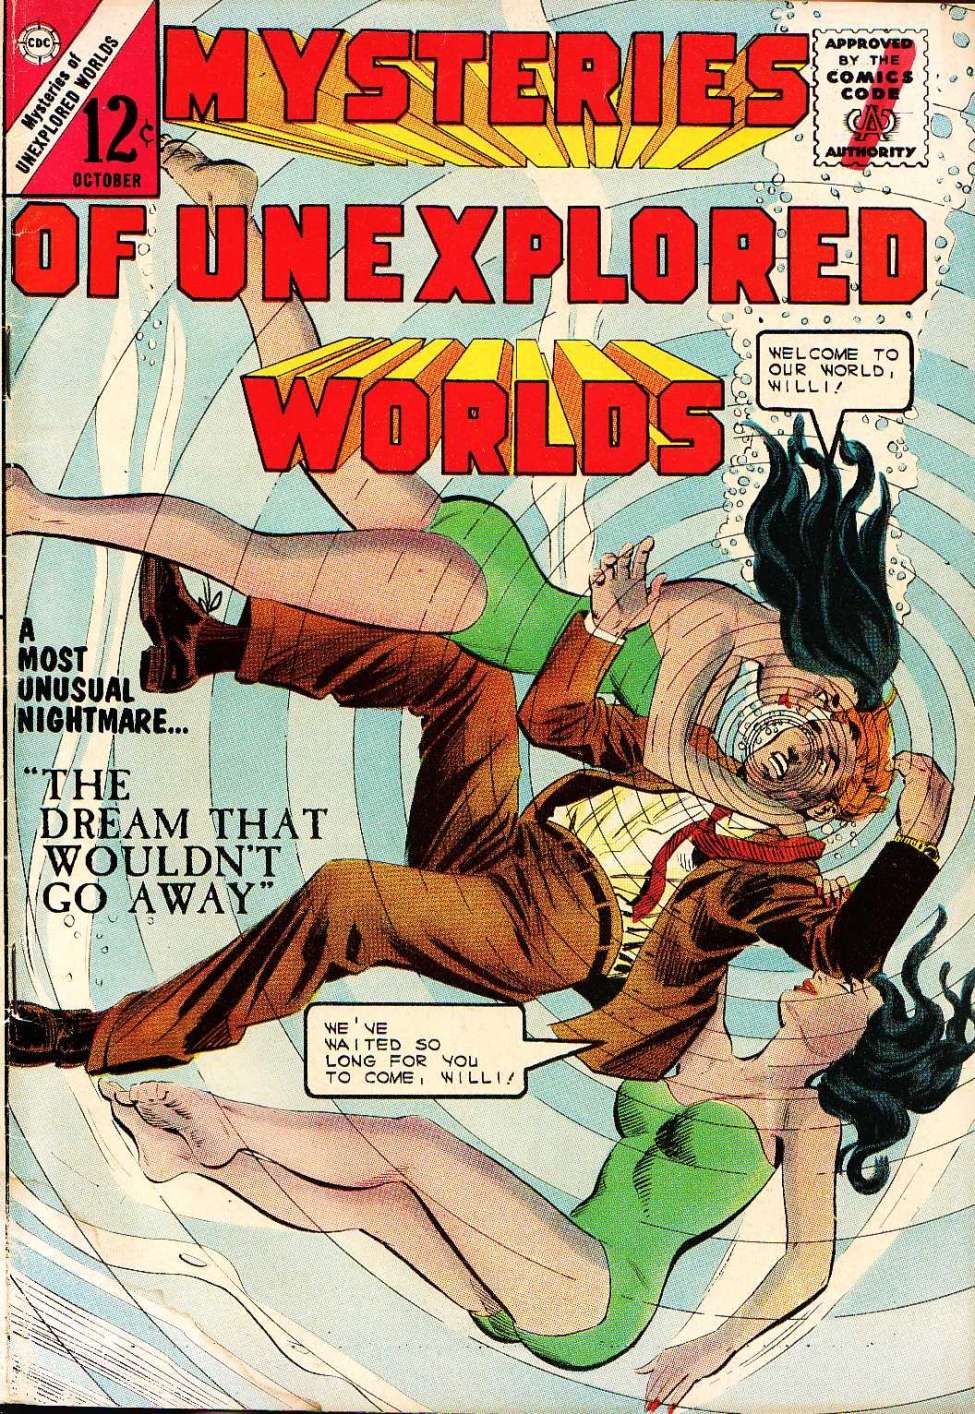 Comic Book Cover For Mysteries of Unexplored Worlds 43